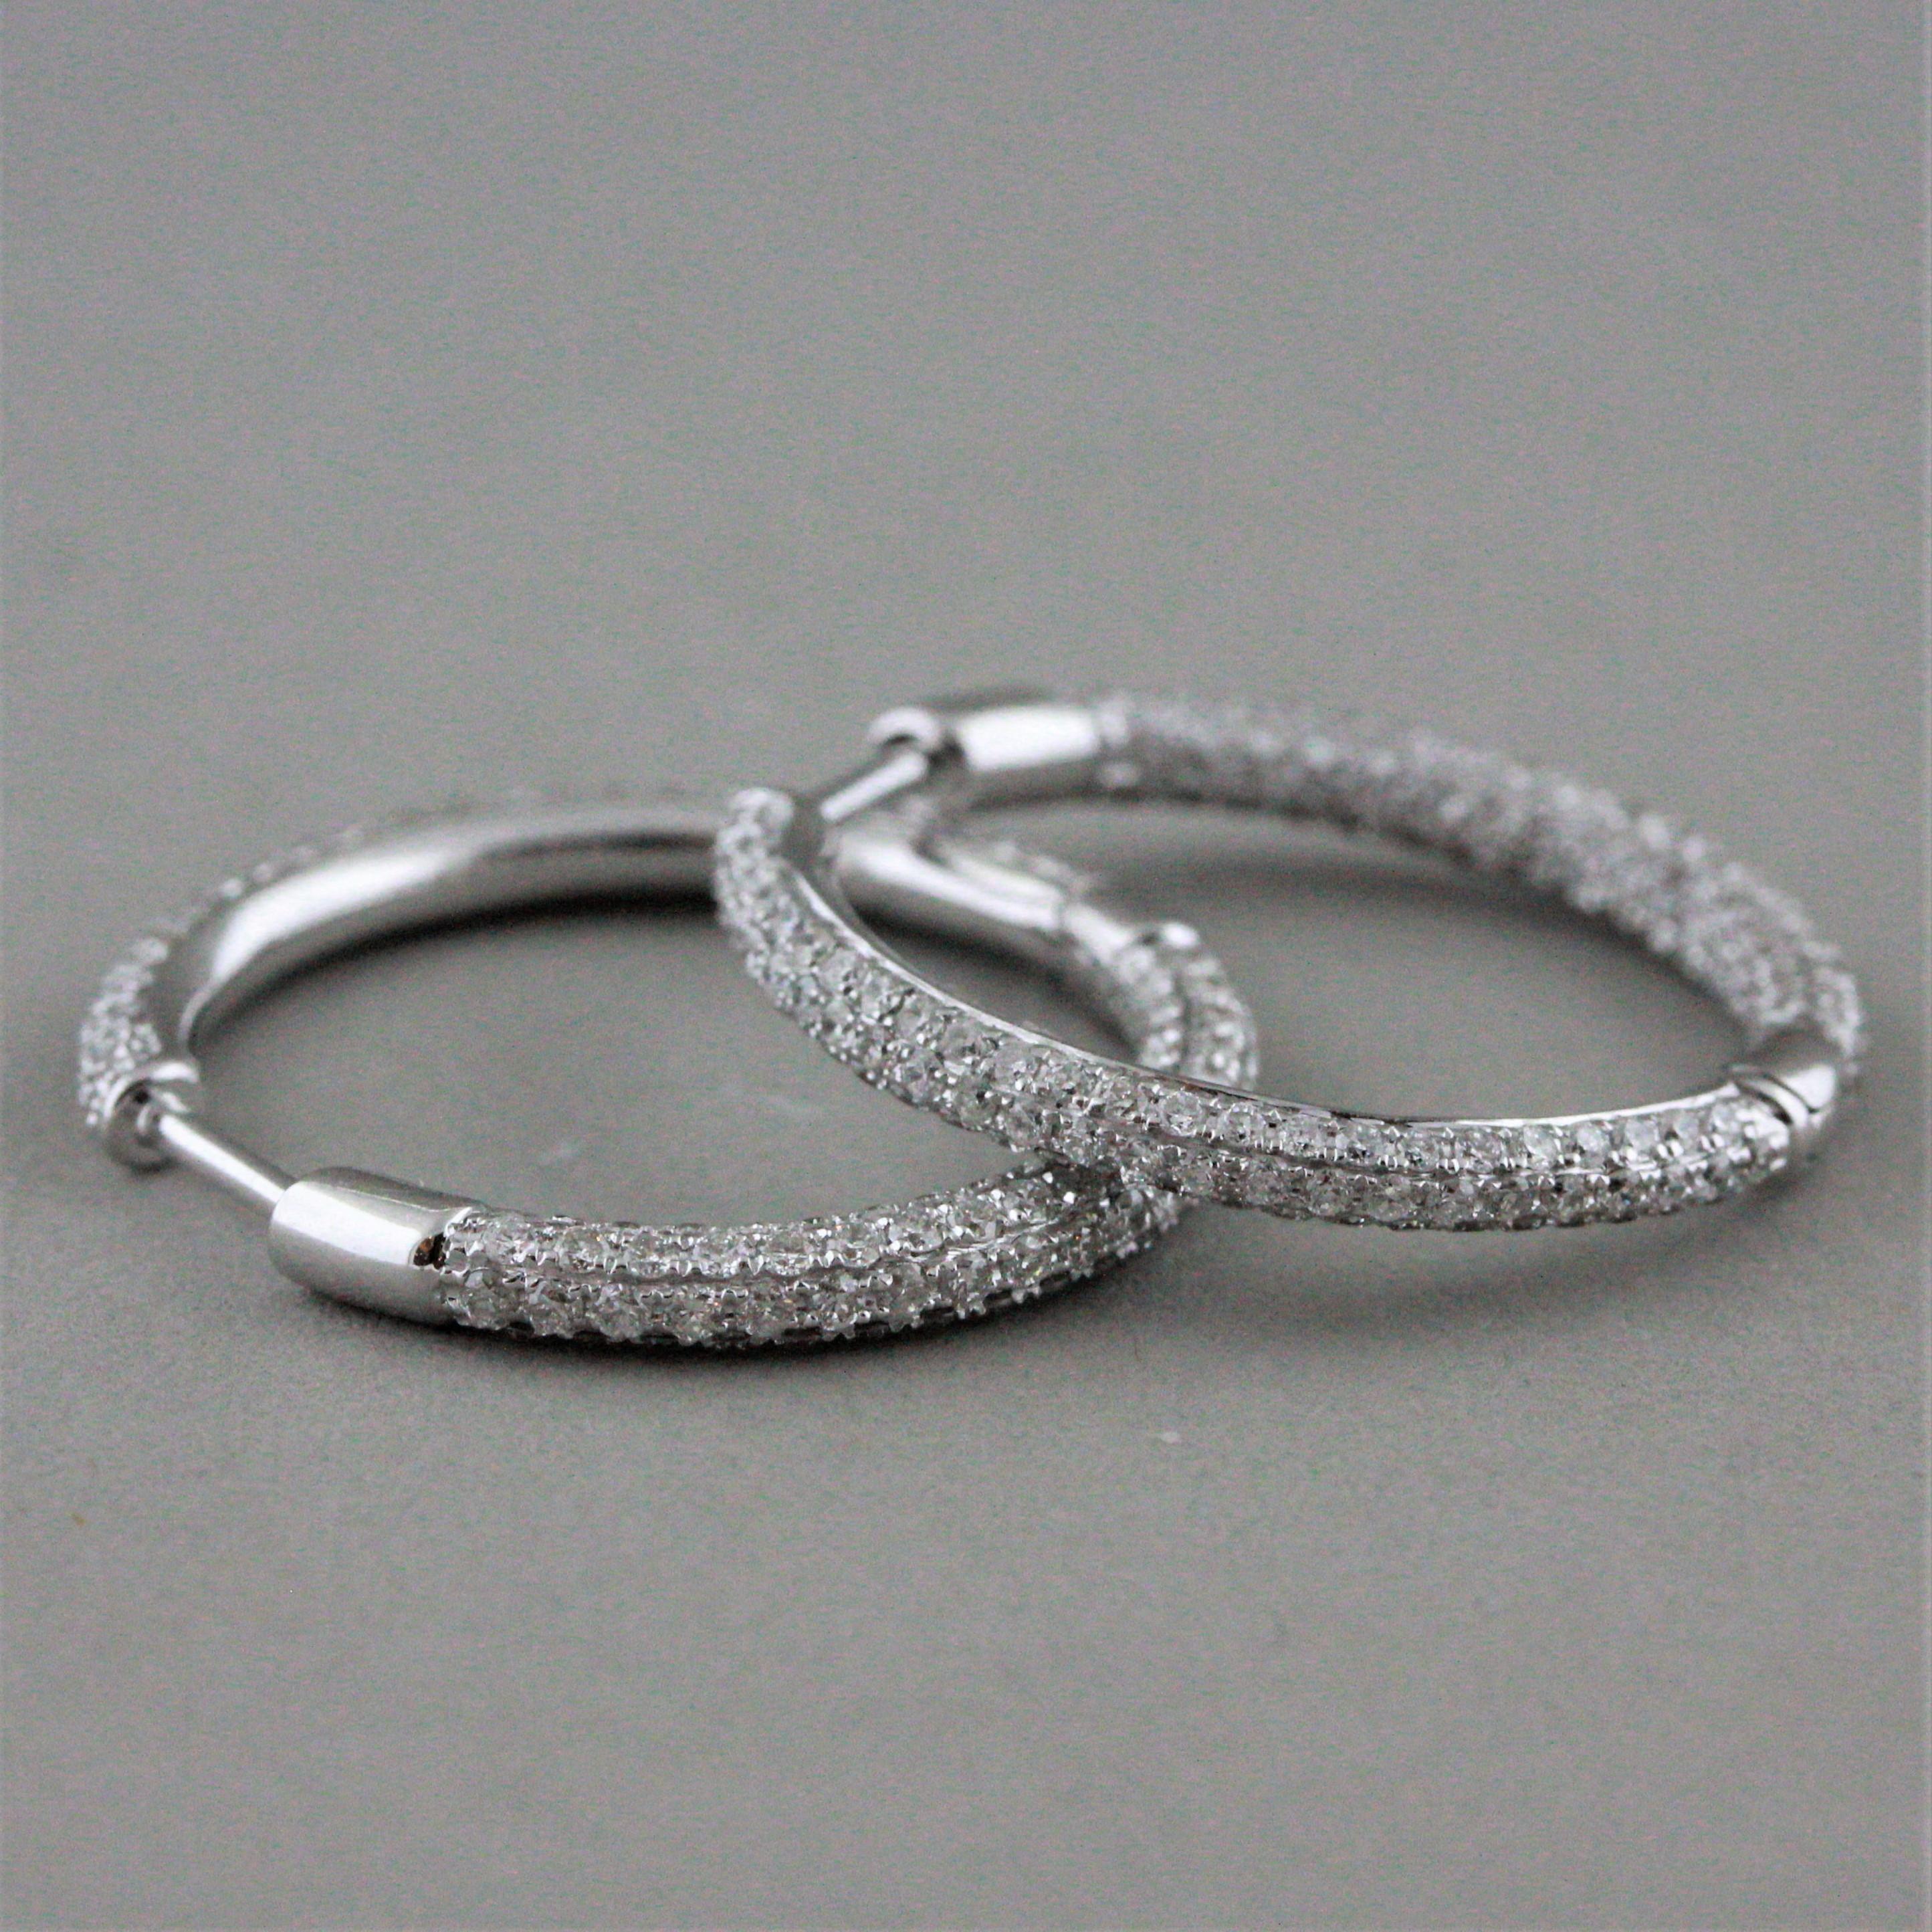 A classic pair of hoop earrings featuring 1.67 carats of round brilliant cut diamonds pavé set. Made in 18k whtie gold these earrings can be worn everyday. 


Length: 0.9 inches
